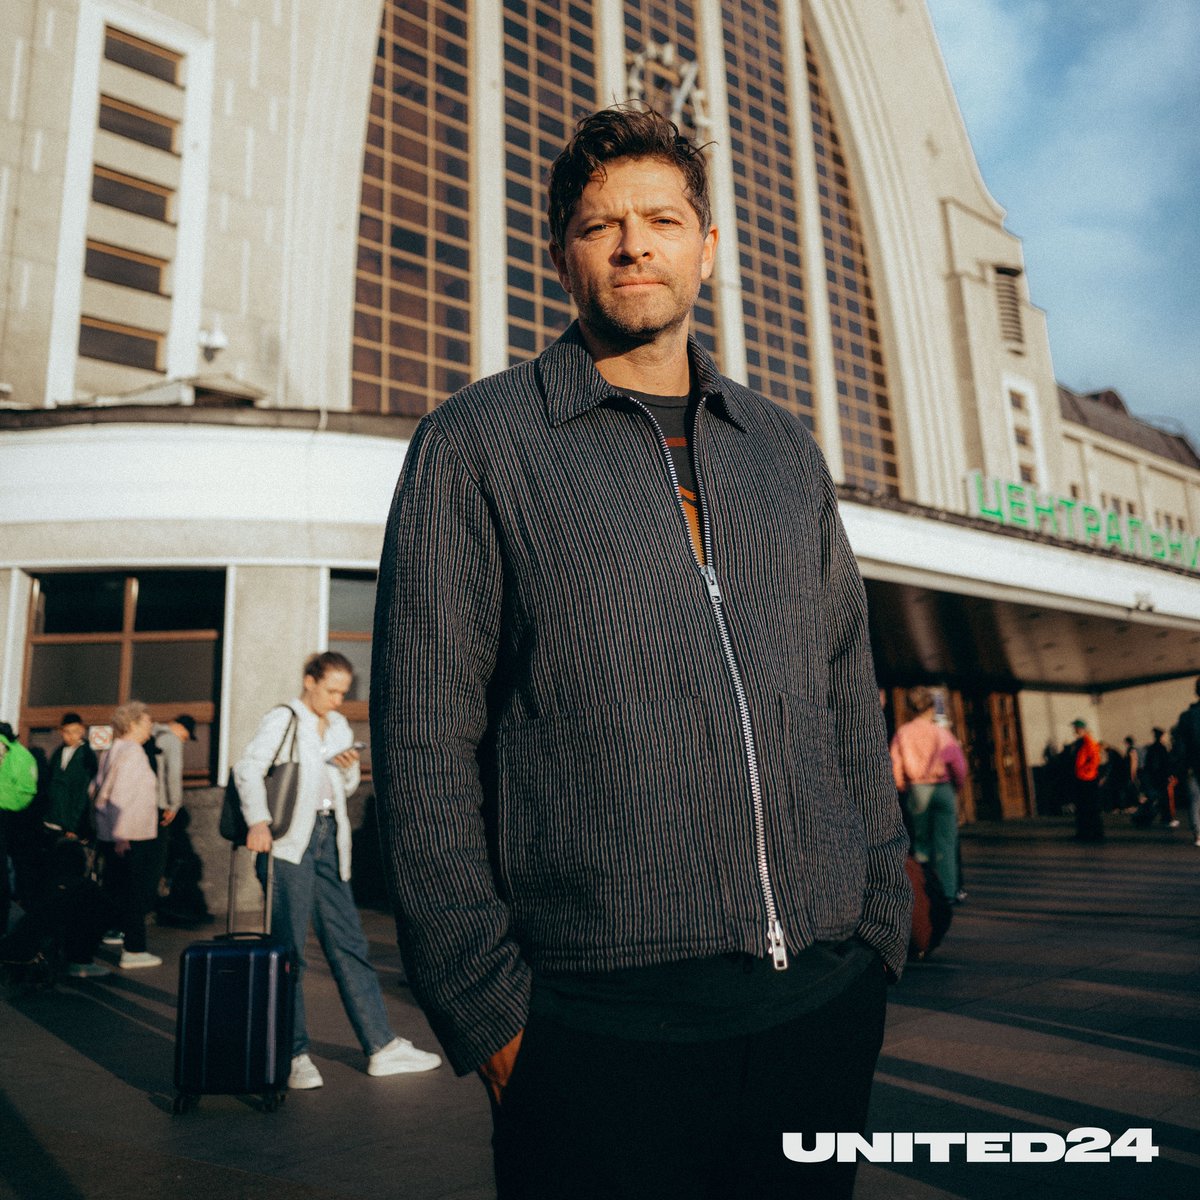 Our Ambassador, @mishacollins, has arrived in Kyiv and sends his greetings💙💛 Misha, thank you for coming and supporting Ukraine🇺🇦